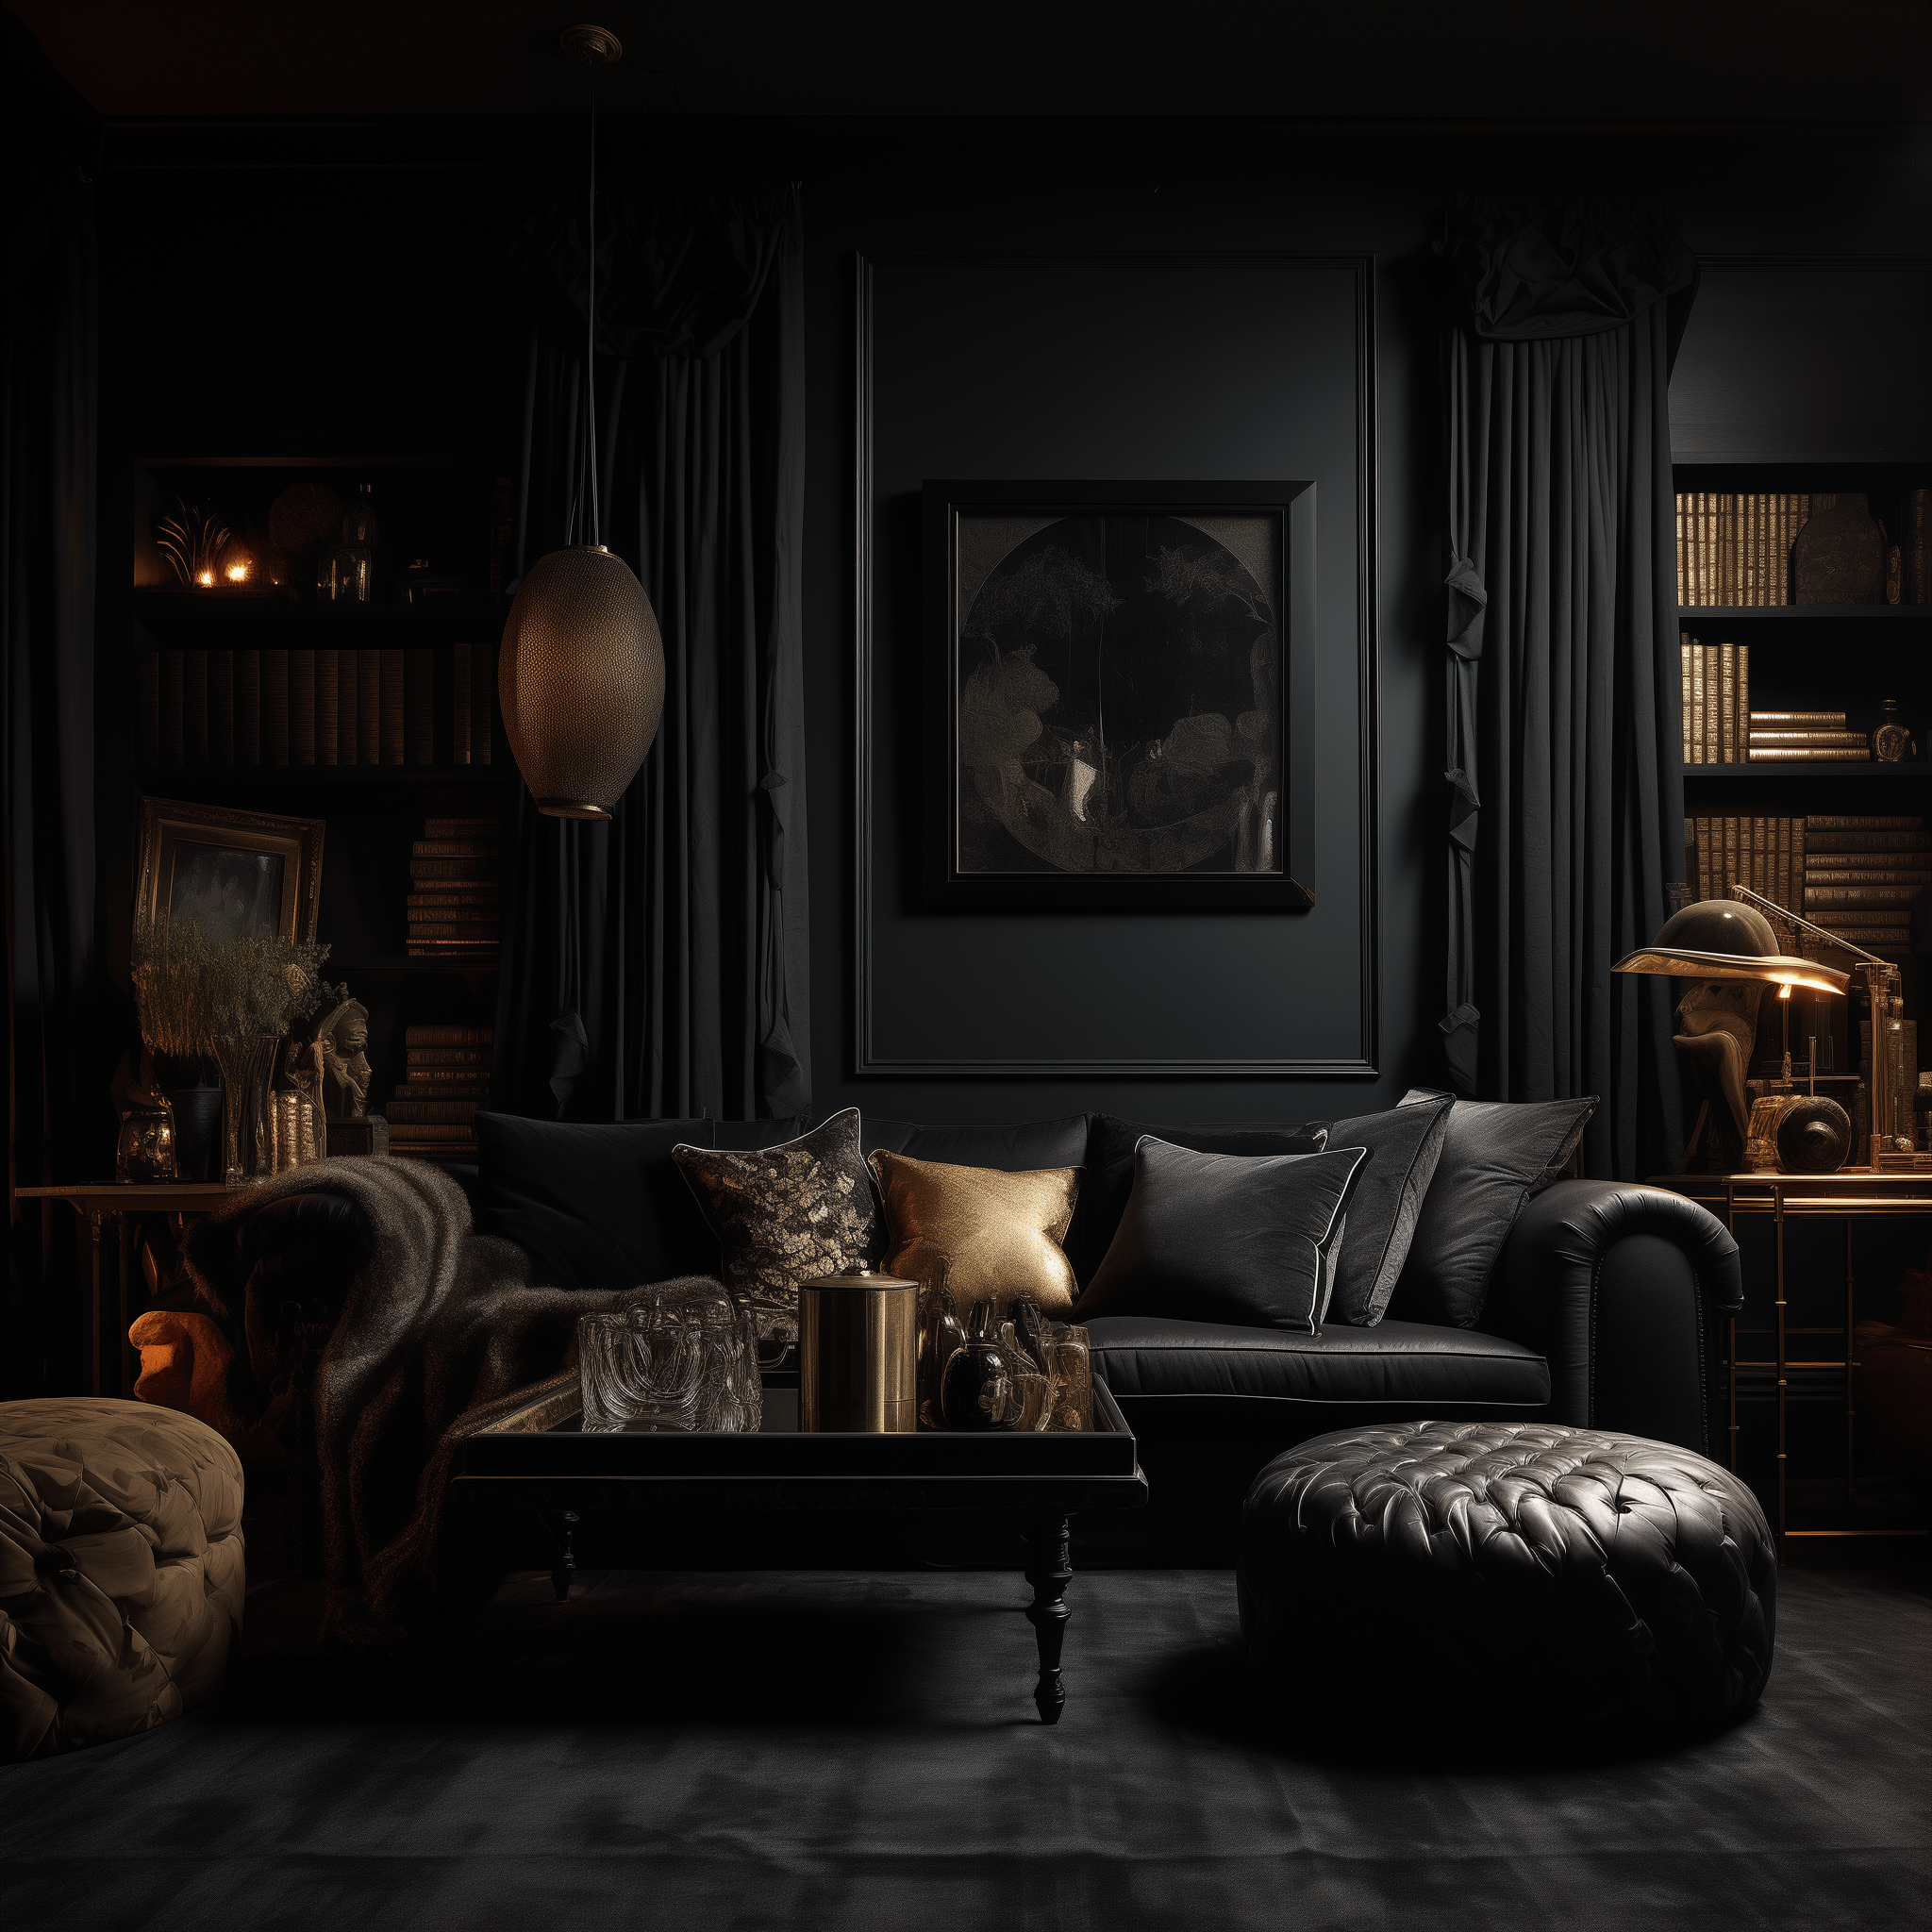 Eye-level view of a dark living room with luxurious leather furniture and sophisticated decor, creating an elegant and cozy atmosphere.